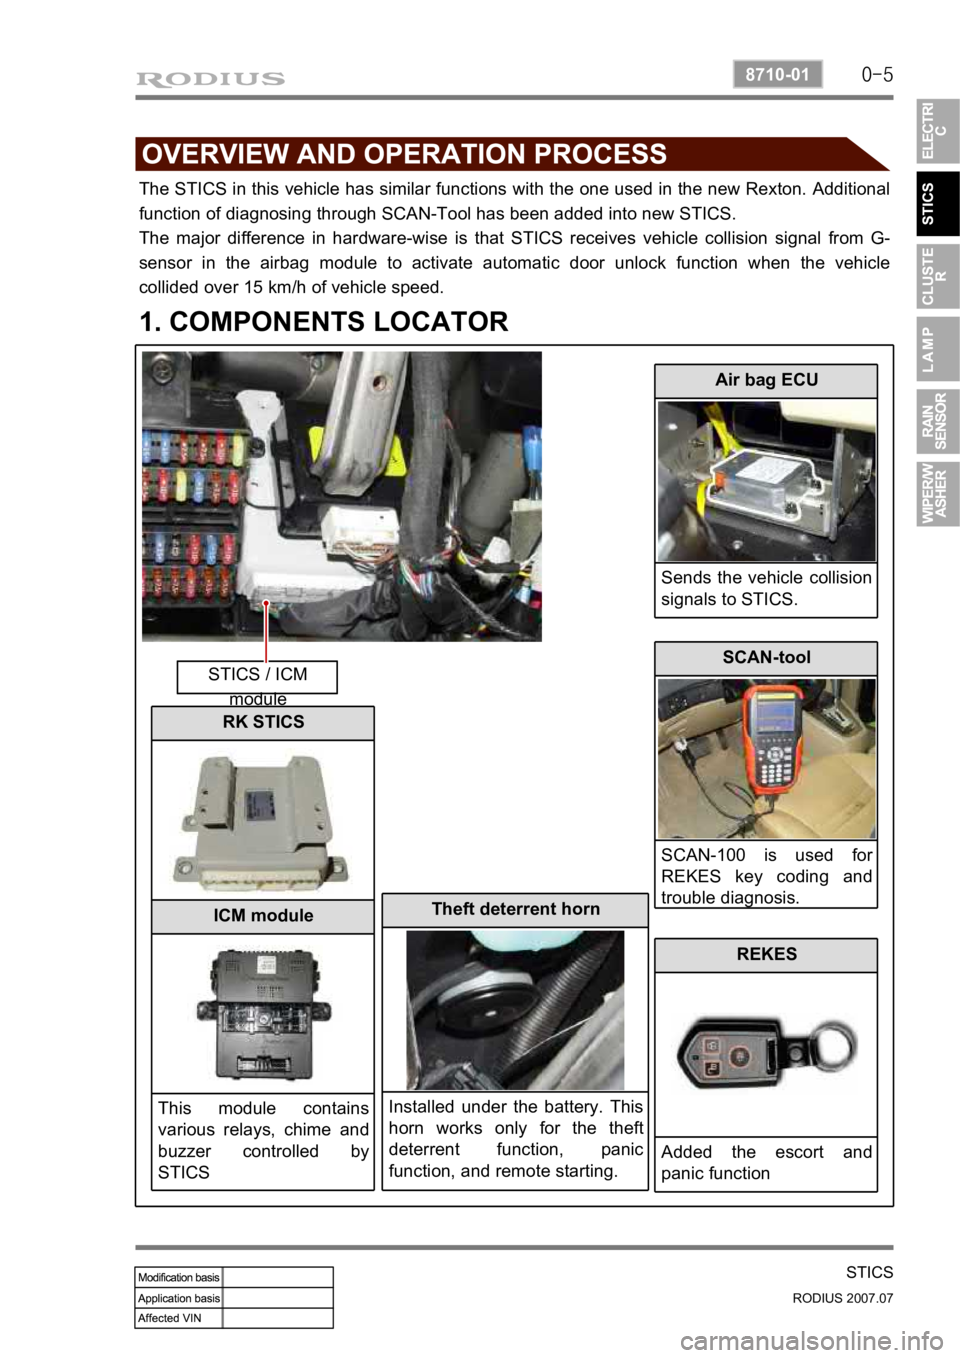 SSANGYONG RODIUS 2006  Service Manual 0-5
STICS
RODIUS 2007.07
8710-01
The STICS in this vehicle has similar functions with the one used in the new Rexton. Additional  
function of diagnosing through SCAN-Tool has been added into new STIC